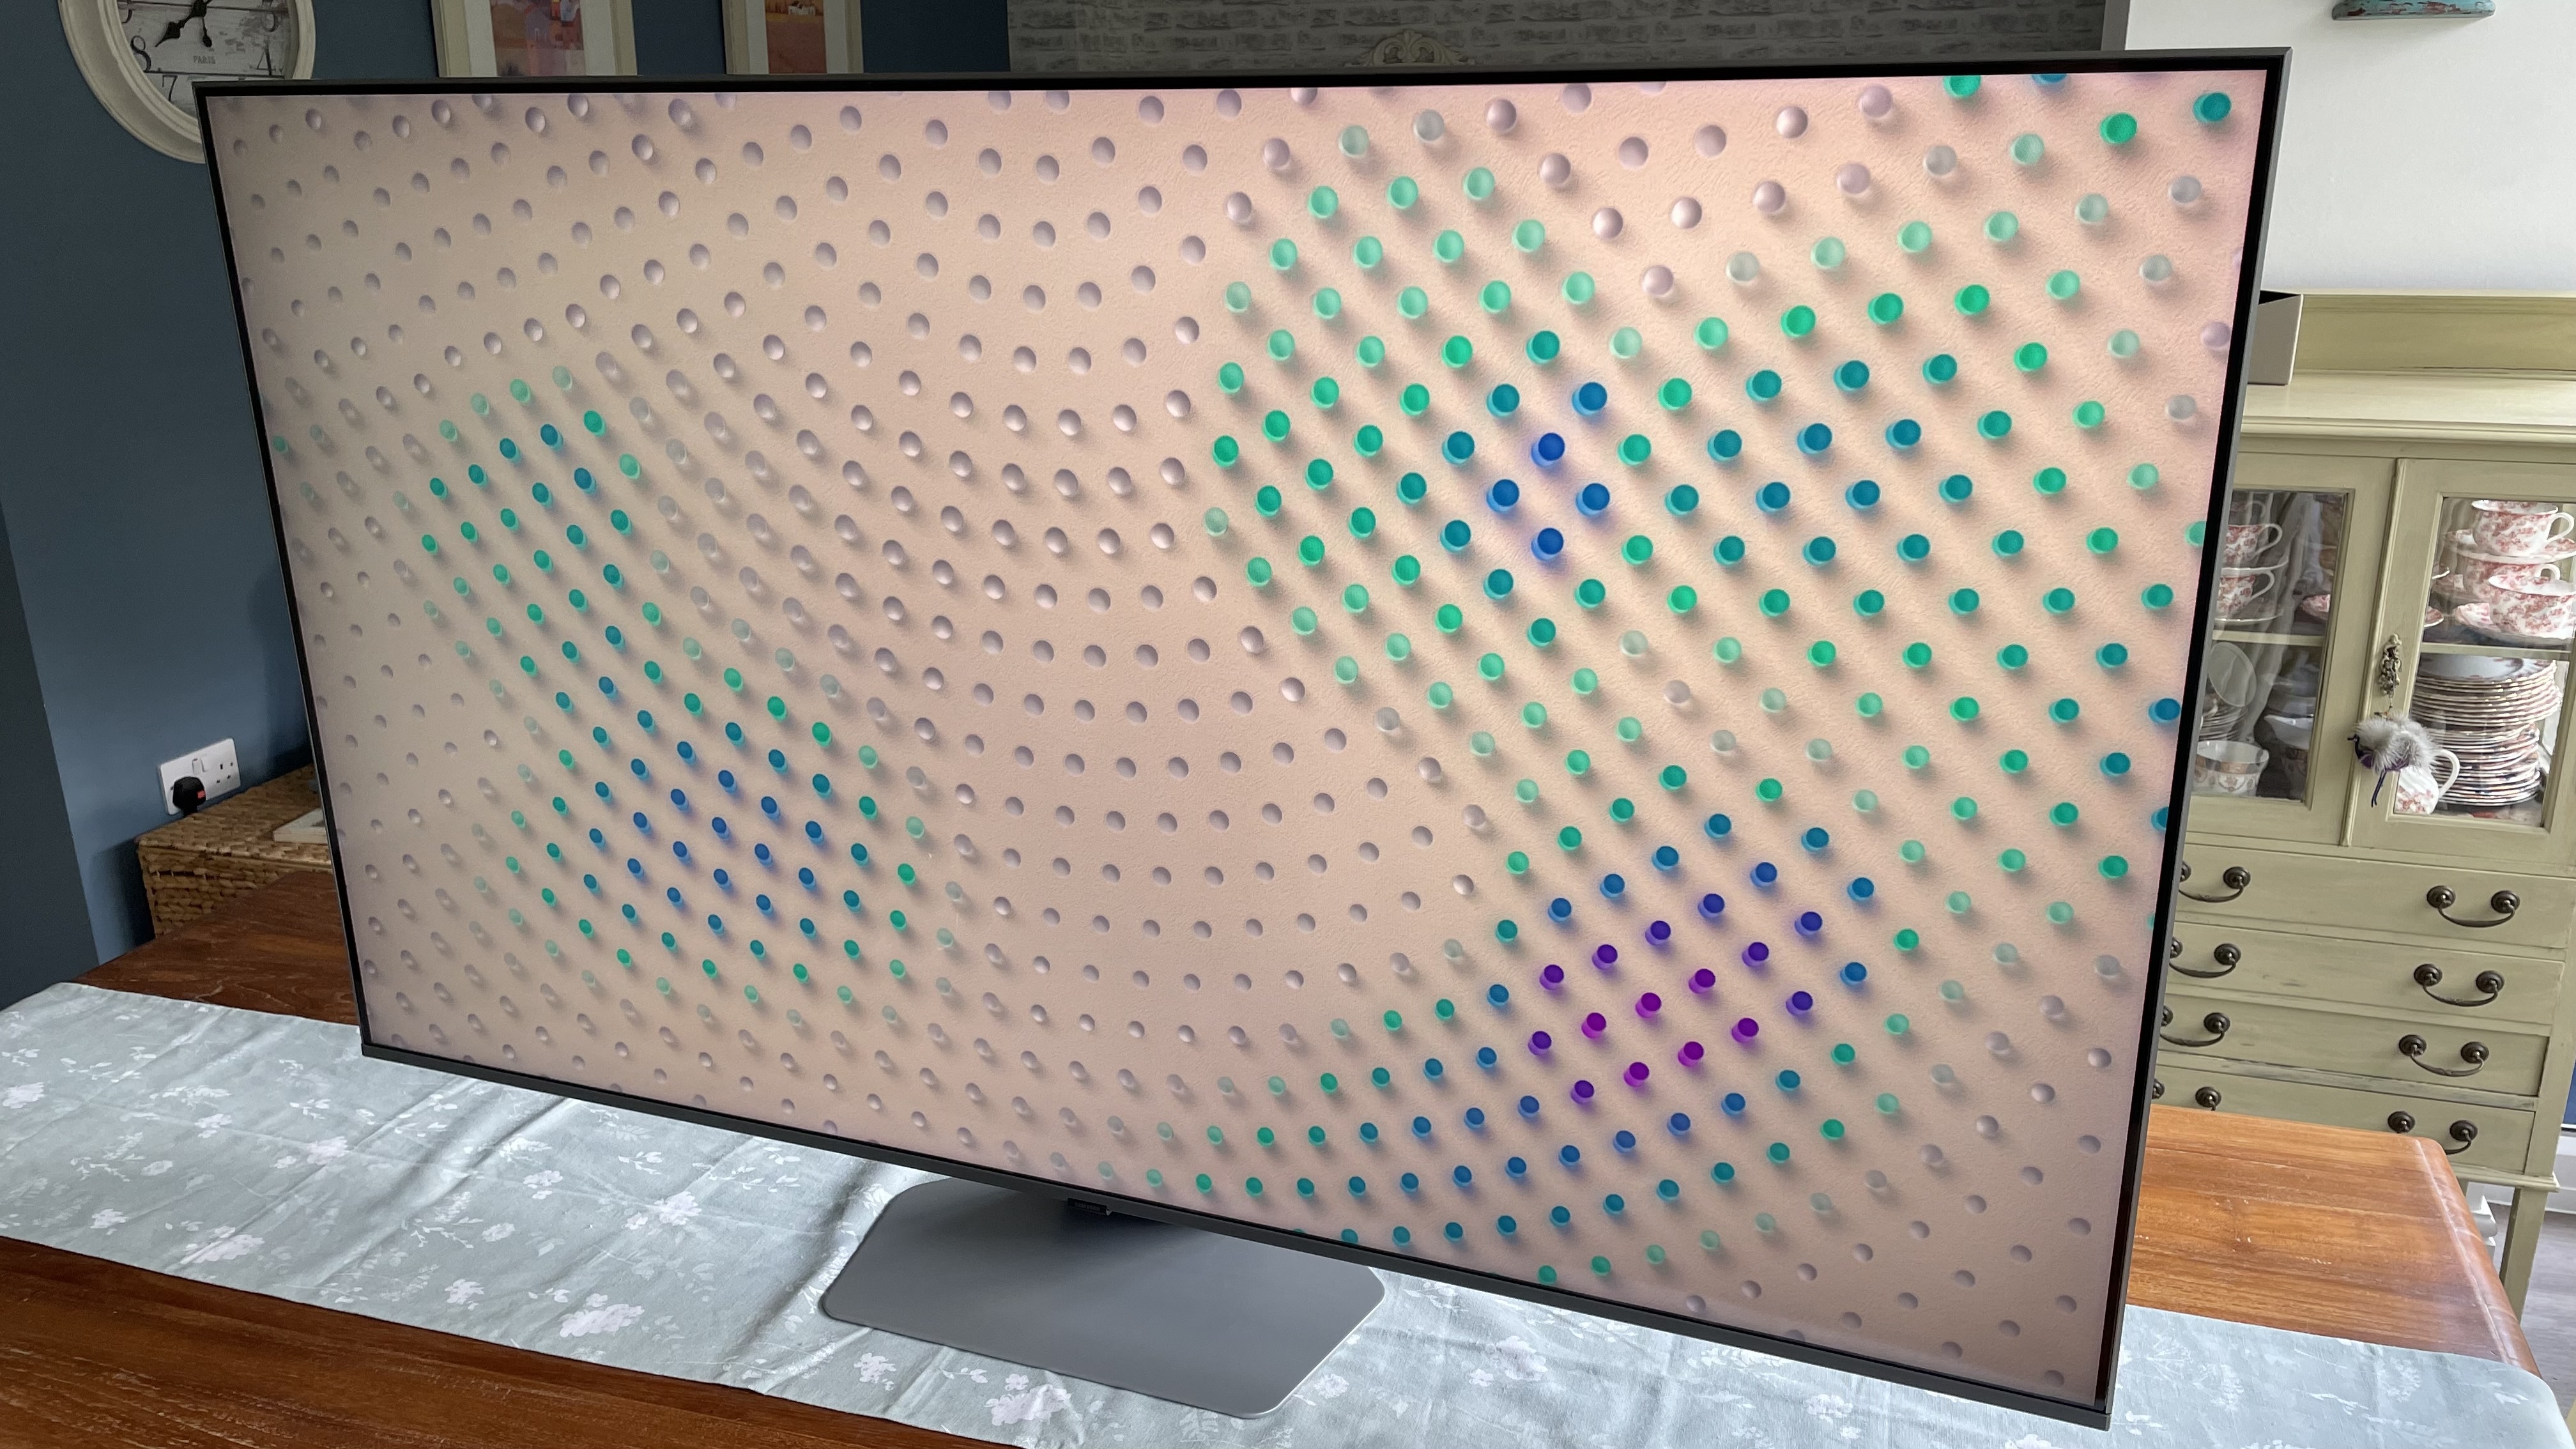 Samsung Q80D showing abstract image onscreen